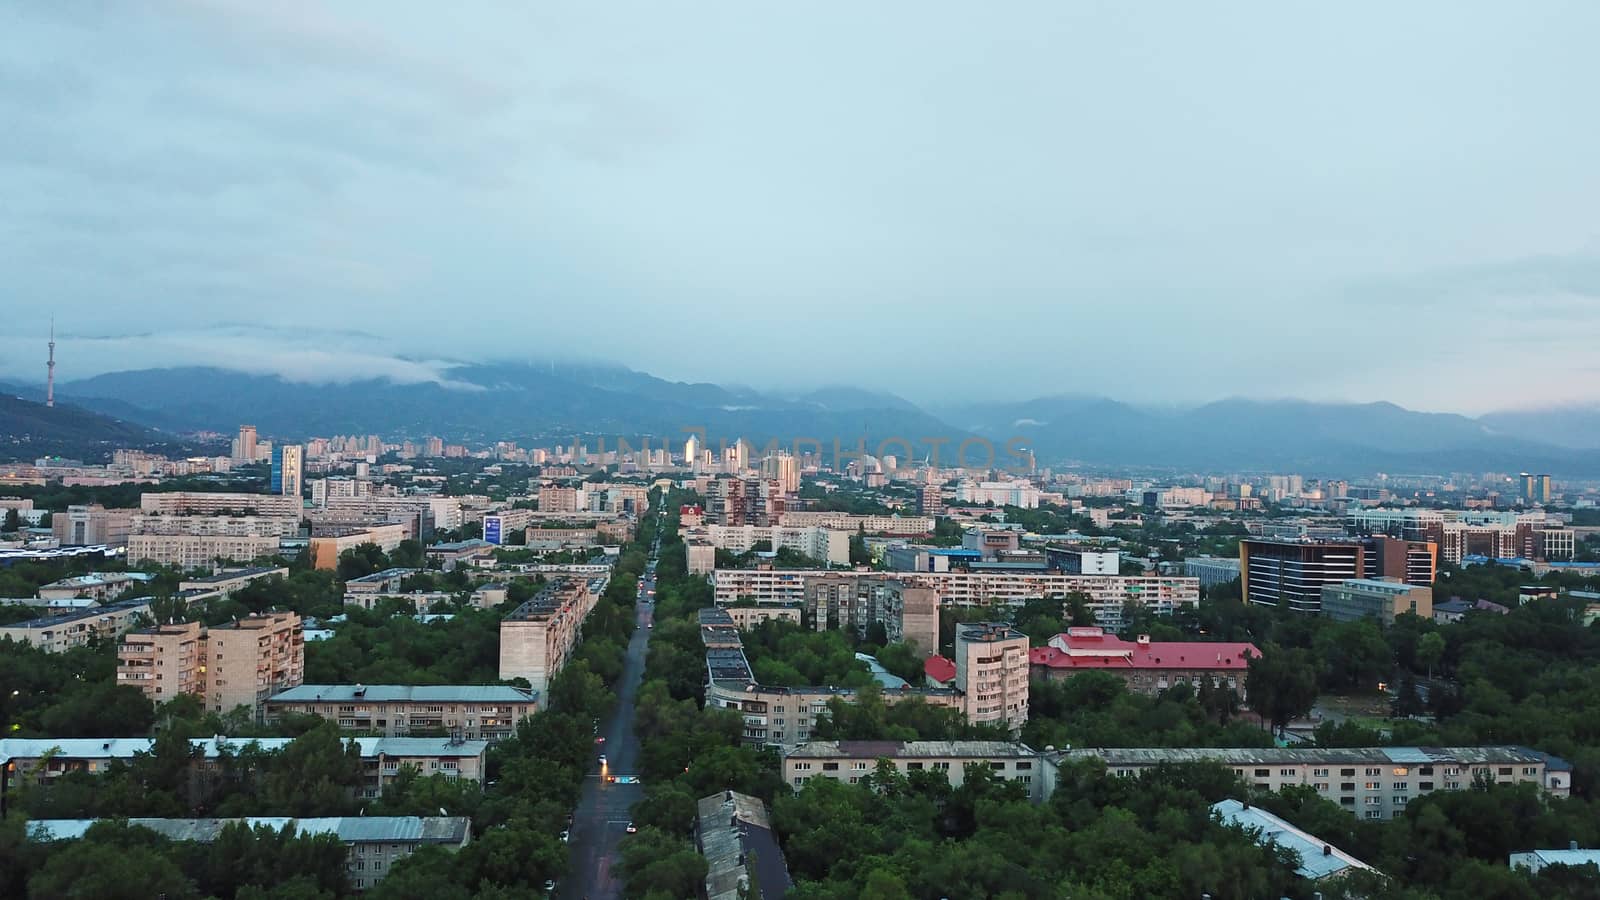 Clouds over the mountains and the city of Almaty at sunset. A lot of green trees, cars driving on the road, high mountains can be seen in the distance. On the hill stands the Kok Tobe TV tower.